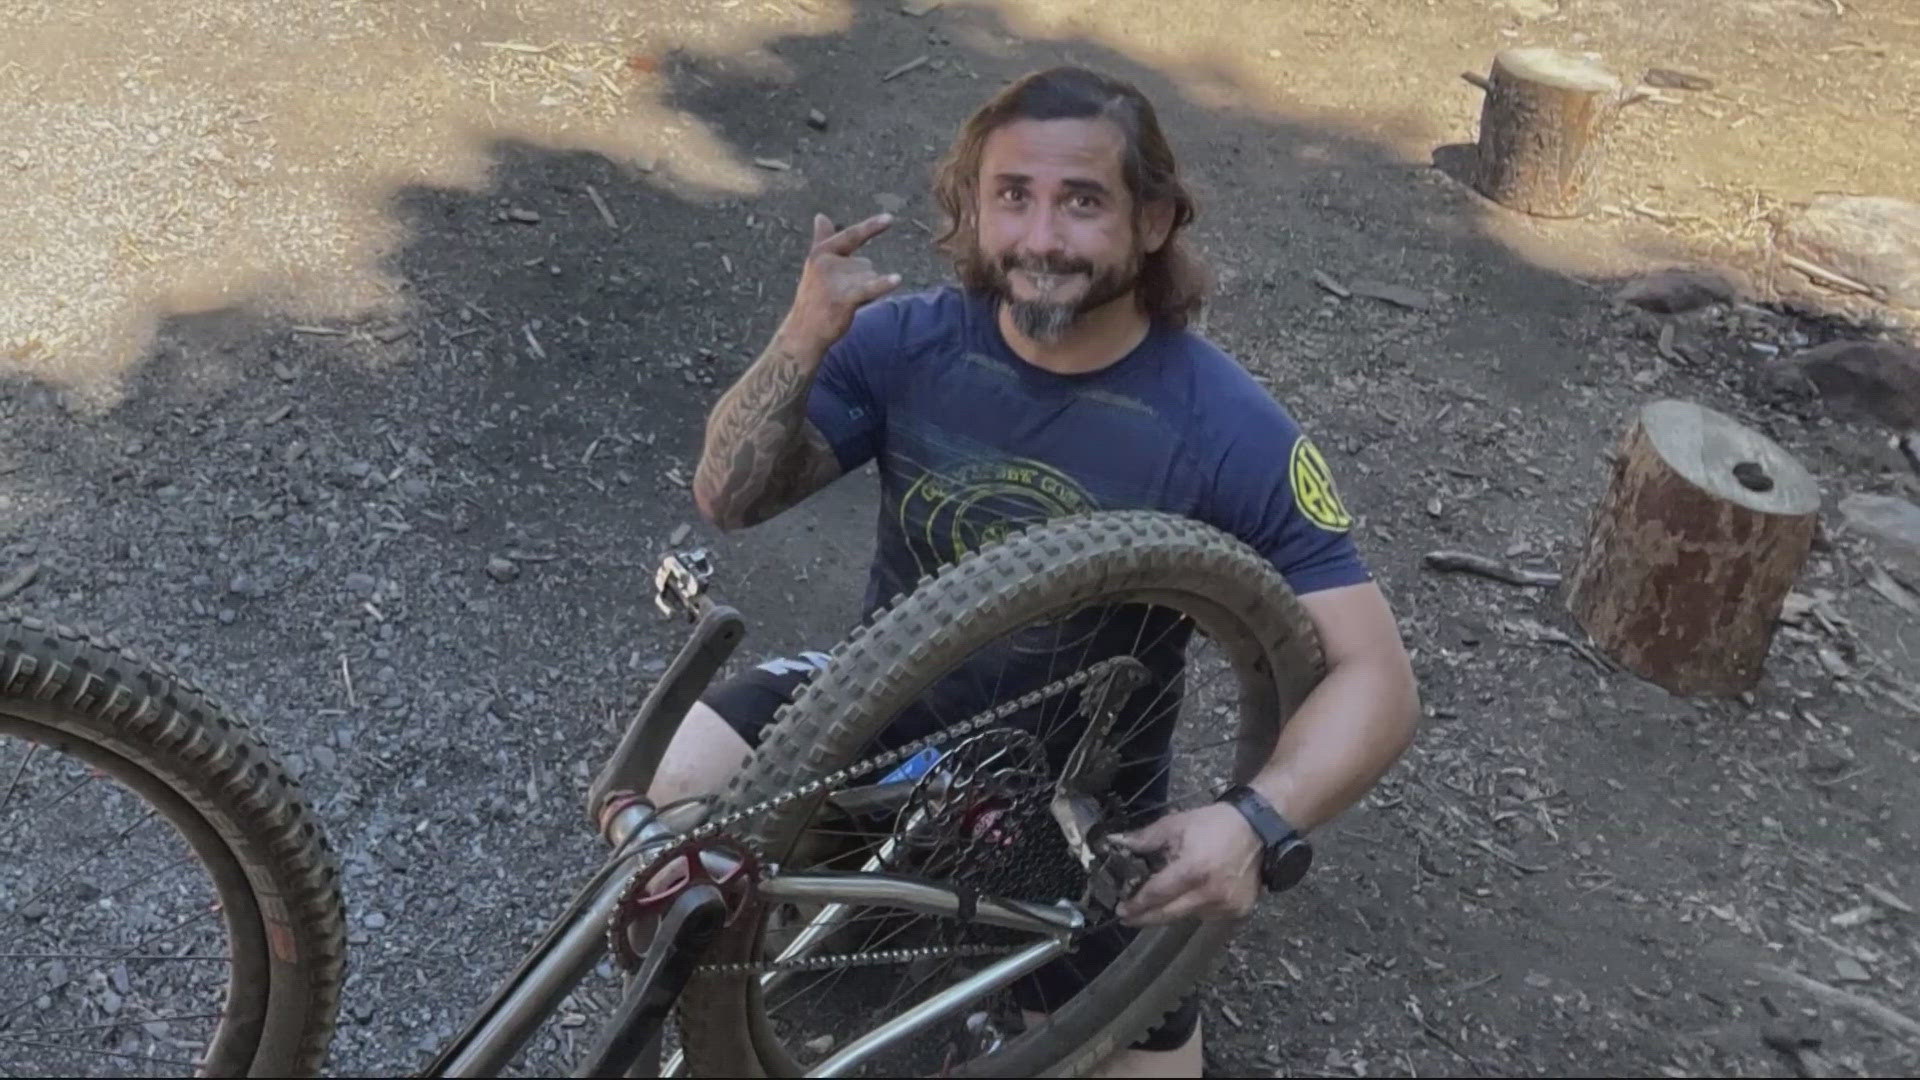 A Marine Corps veteran is asking for the public's help after his mountain bike was stolen from the VA Recovery Center.